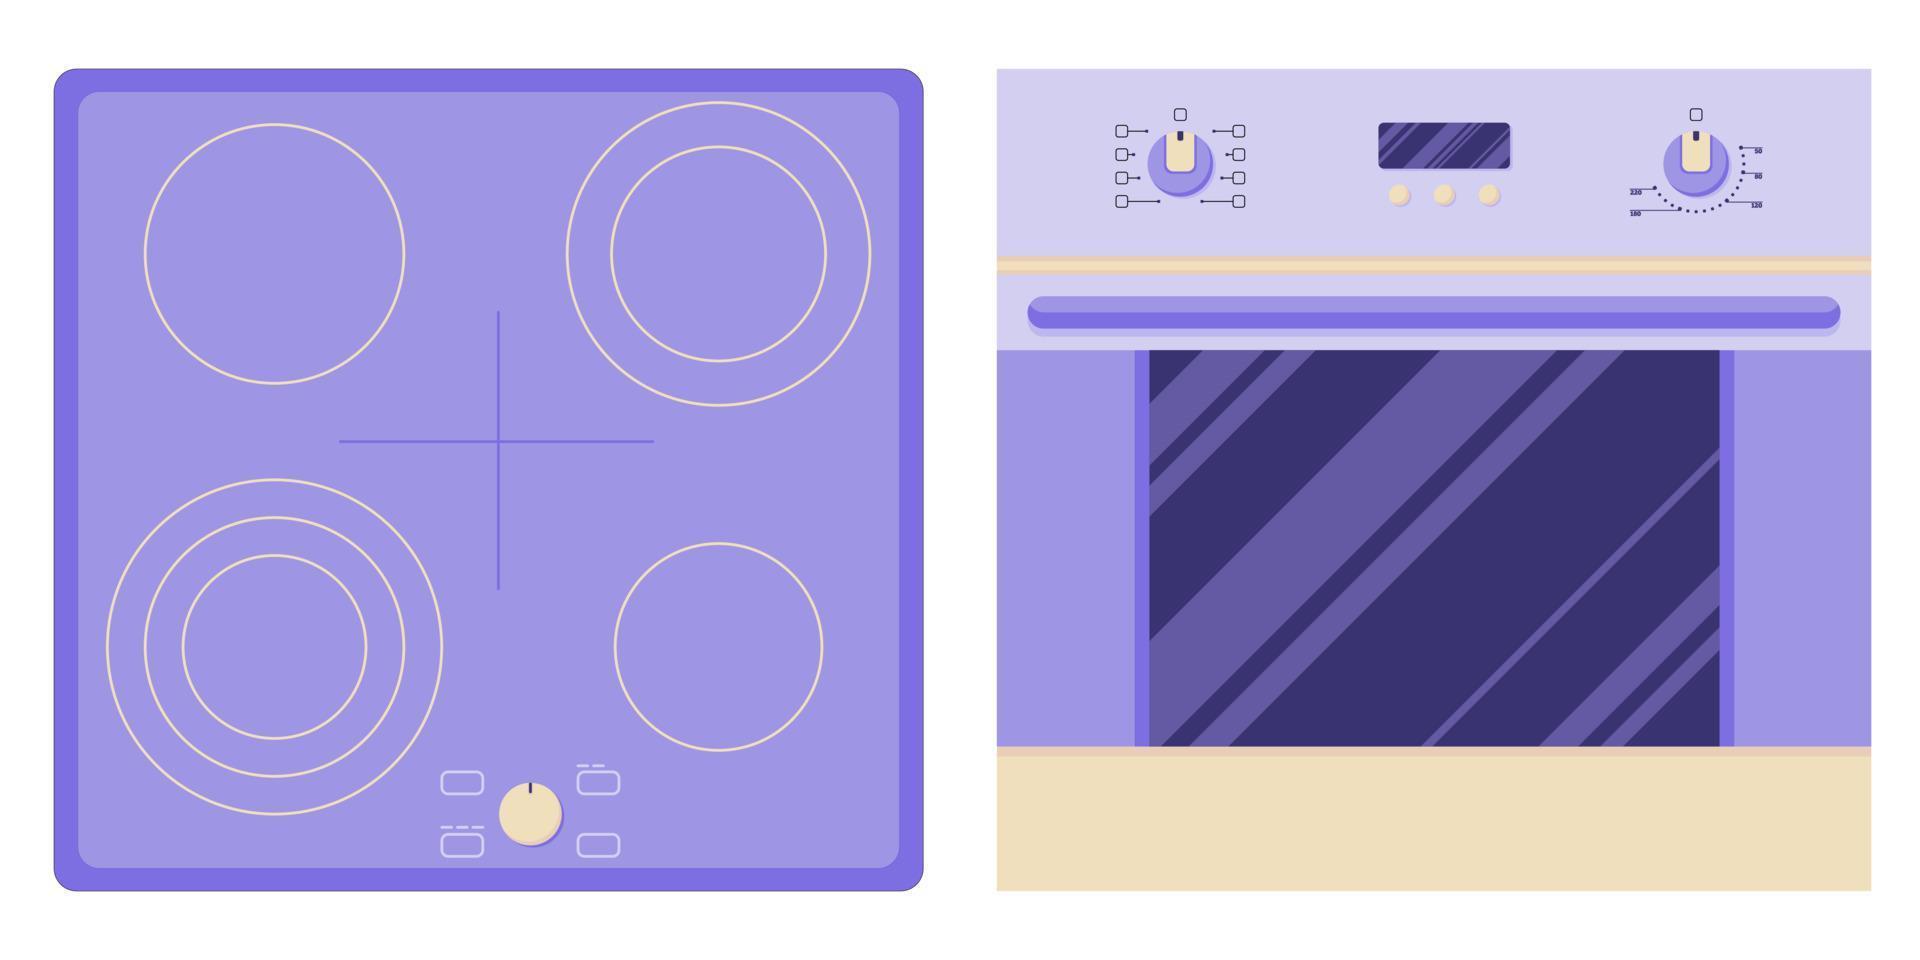 Induction hob and oven for cooking and baking food, different levels of heating and cooking in a flat style isolated on a white background vector